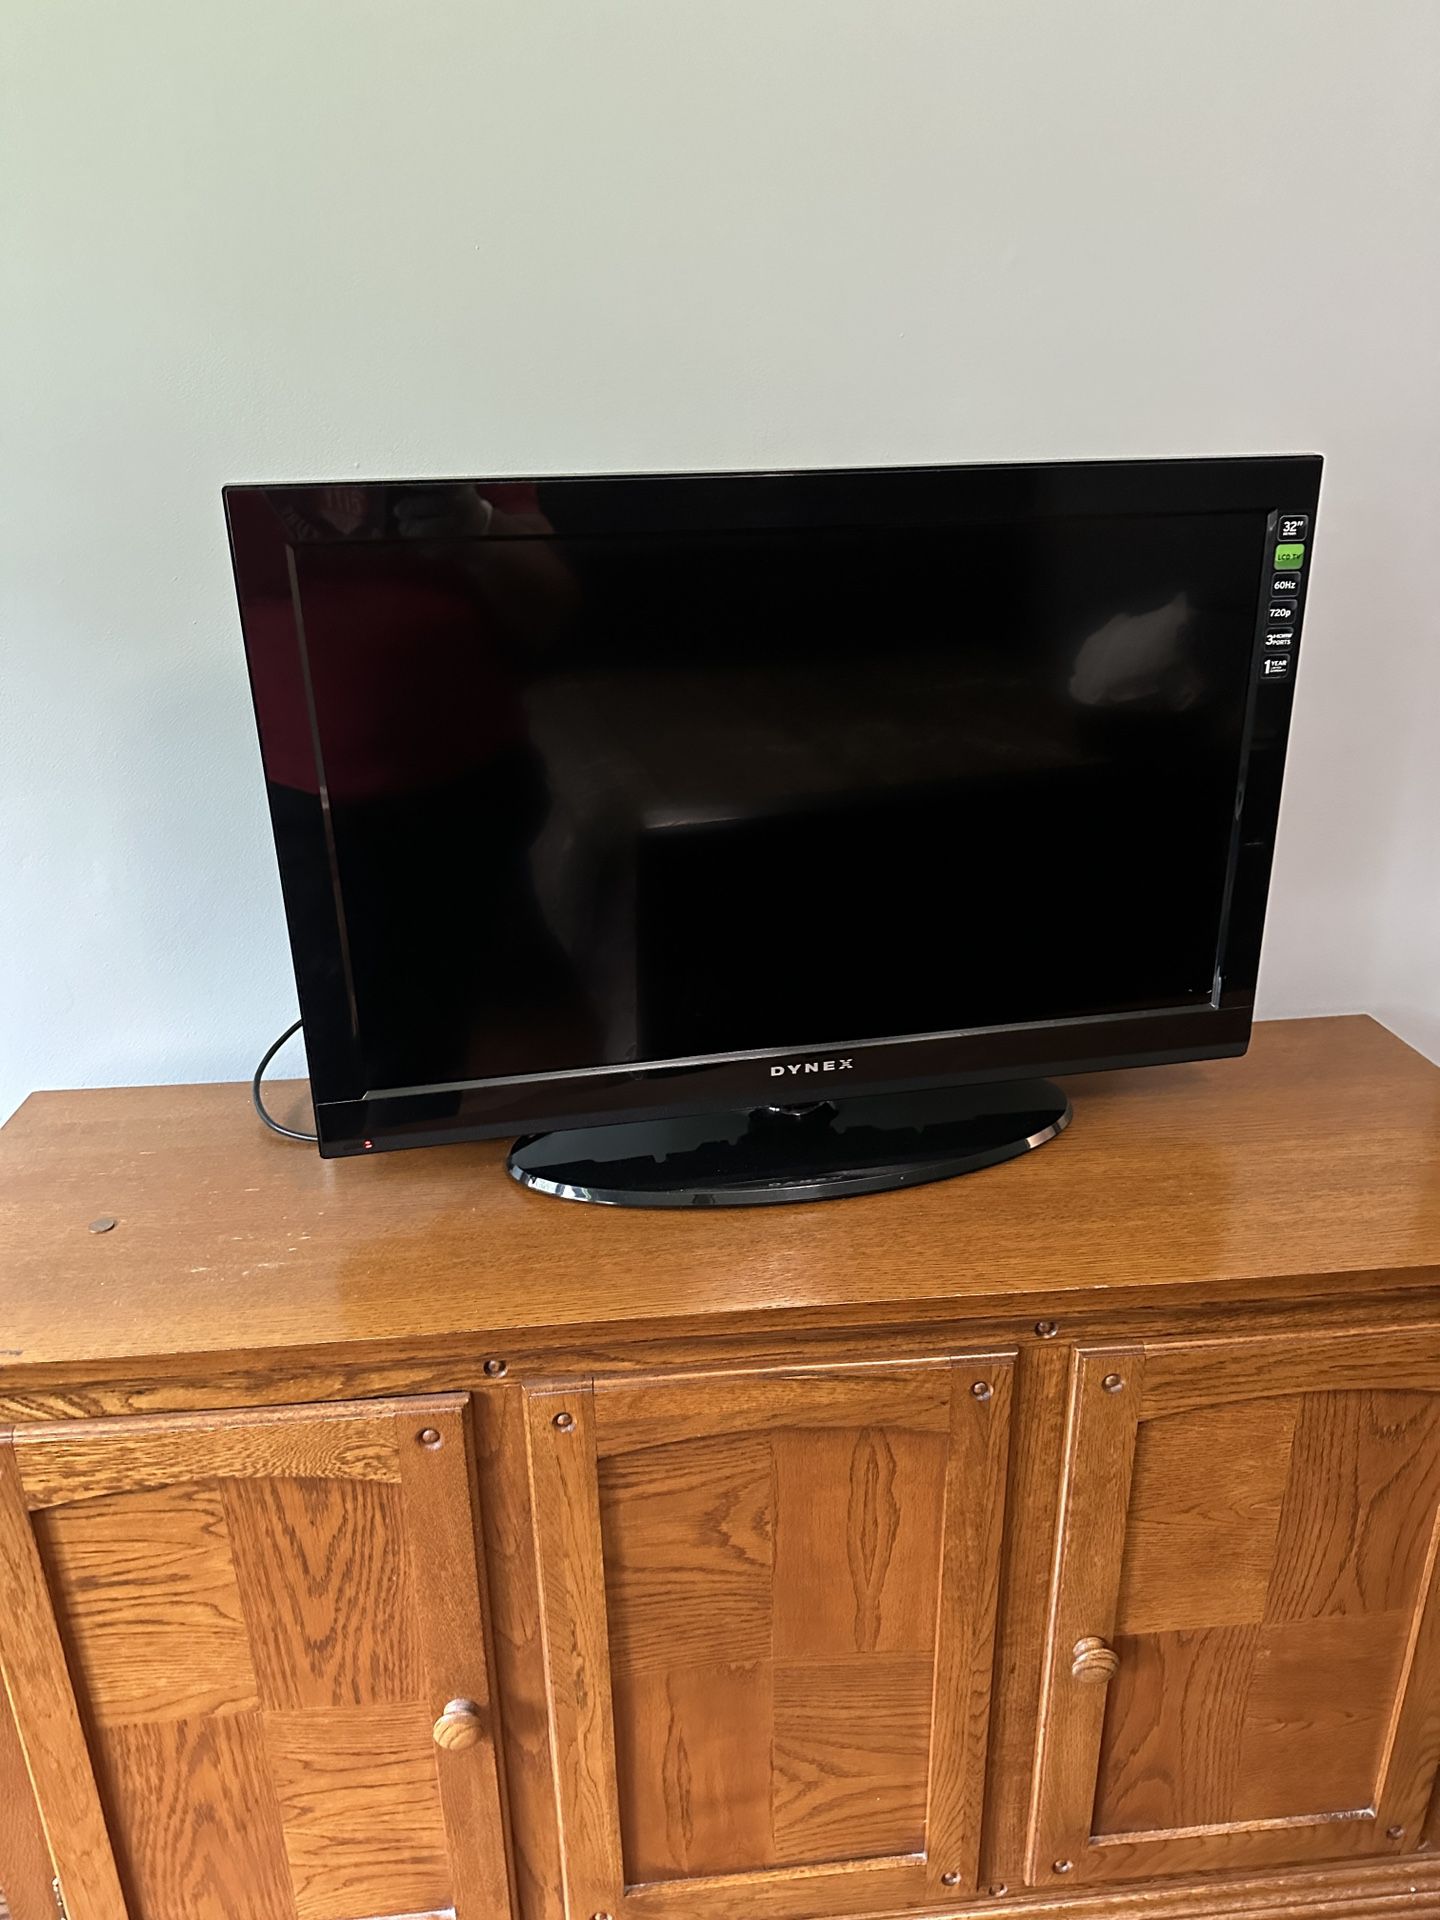 Tv w Tv Stand